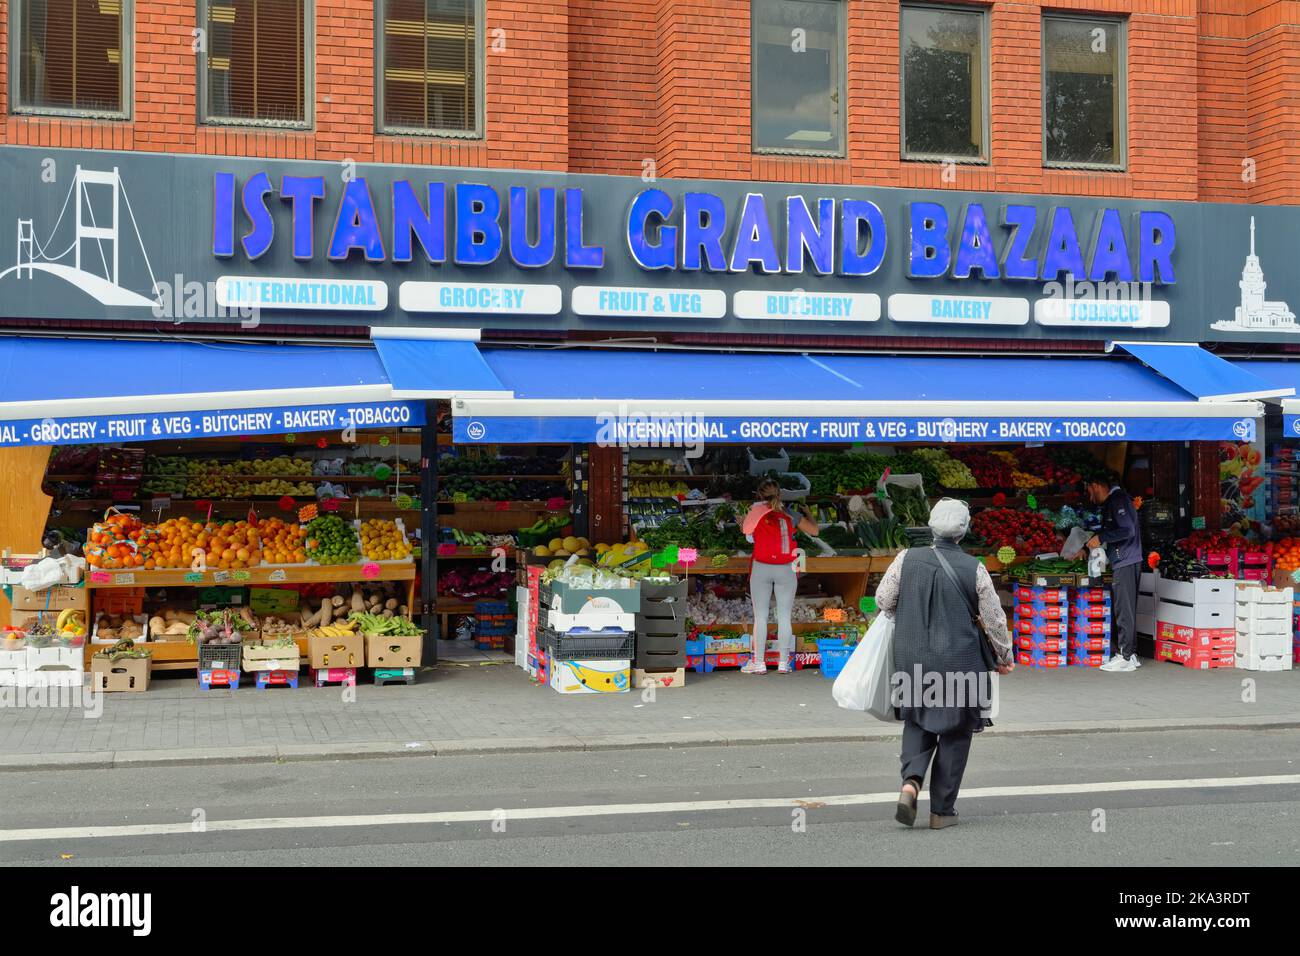 Exterior of the 'Istanbul Grand Bazaar' international grocery store on Hounslow High Street West London England UK Stock Photo